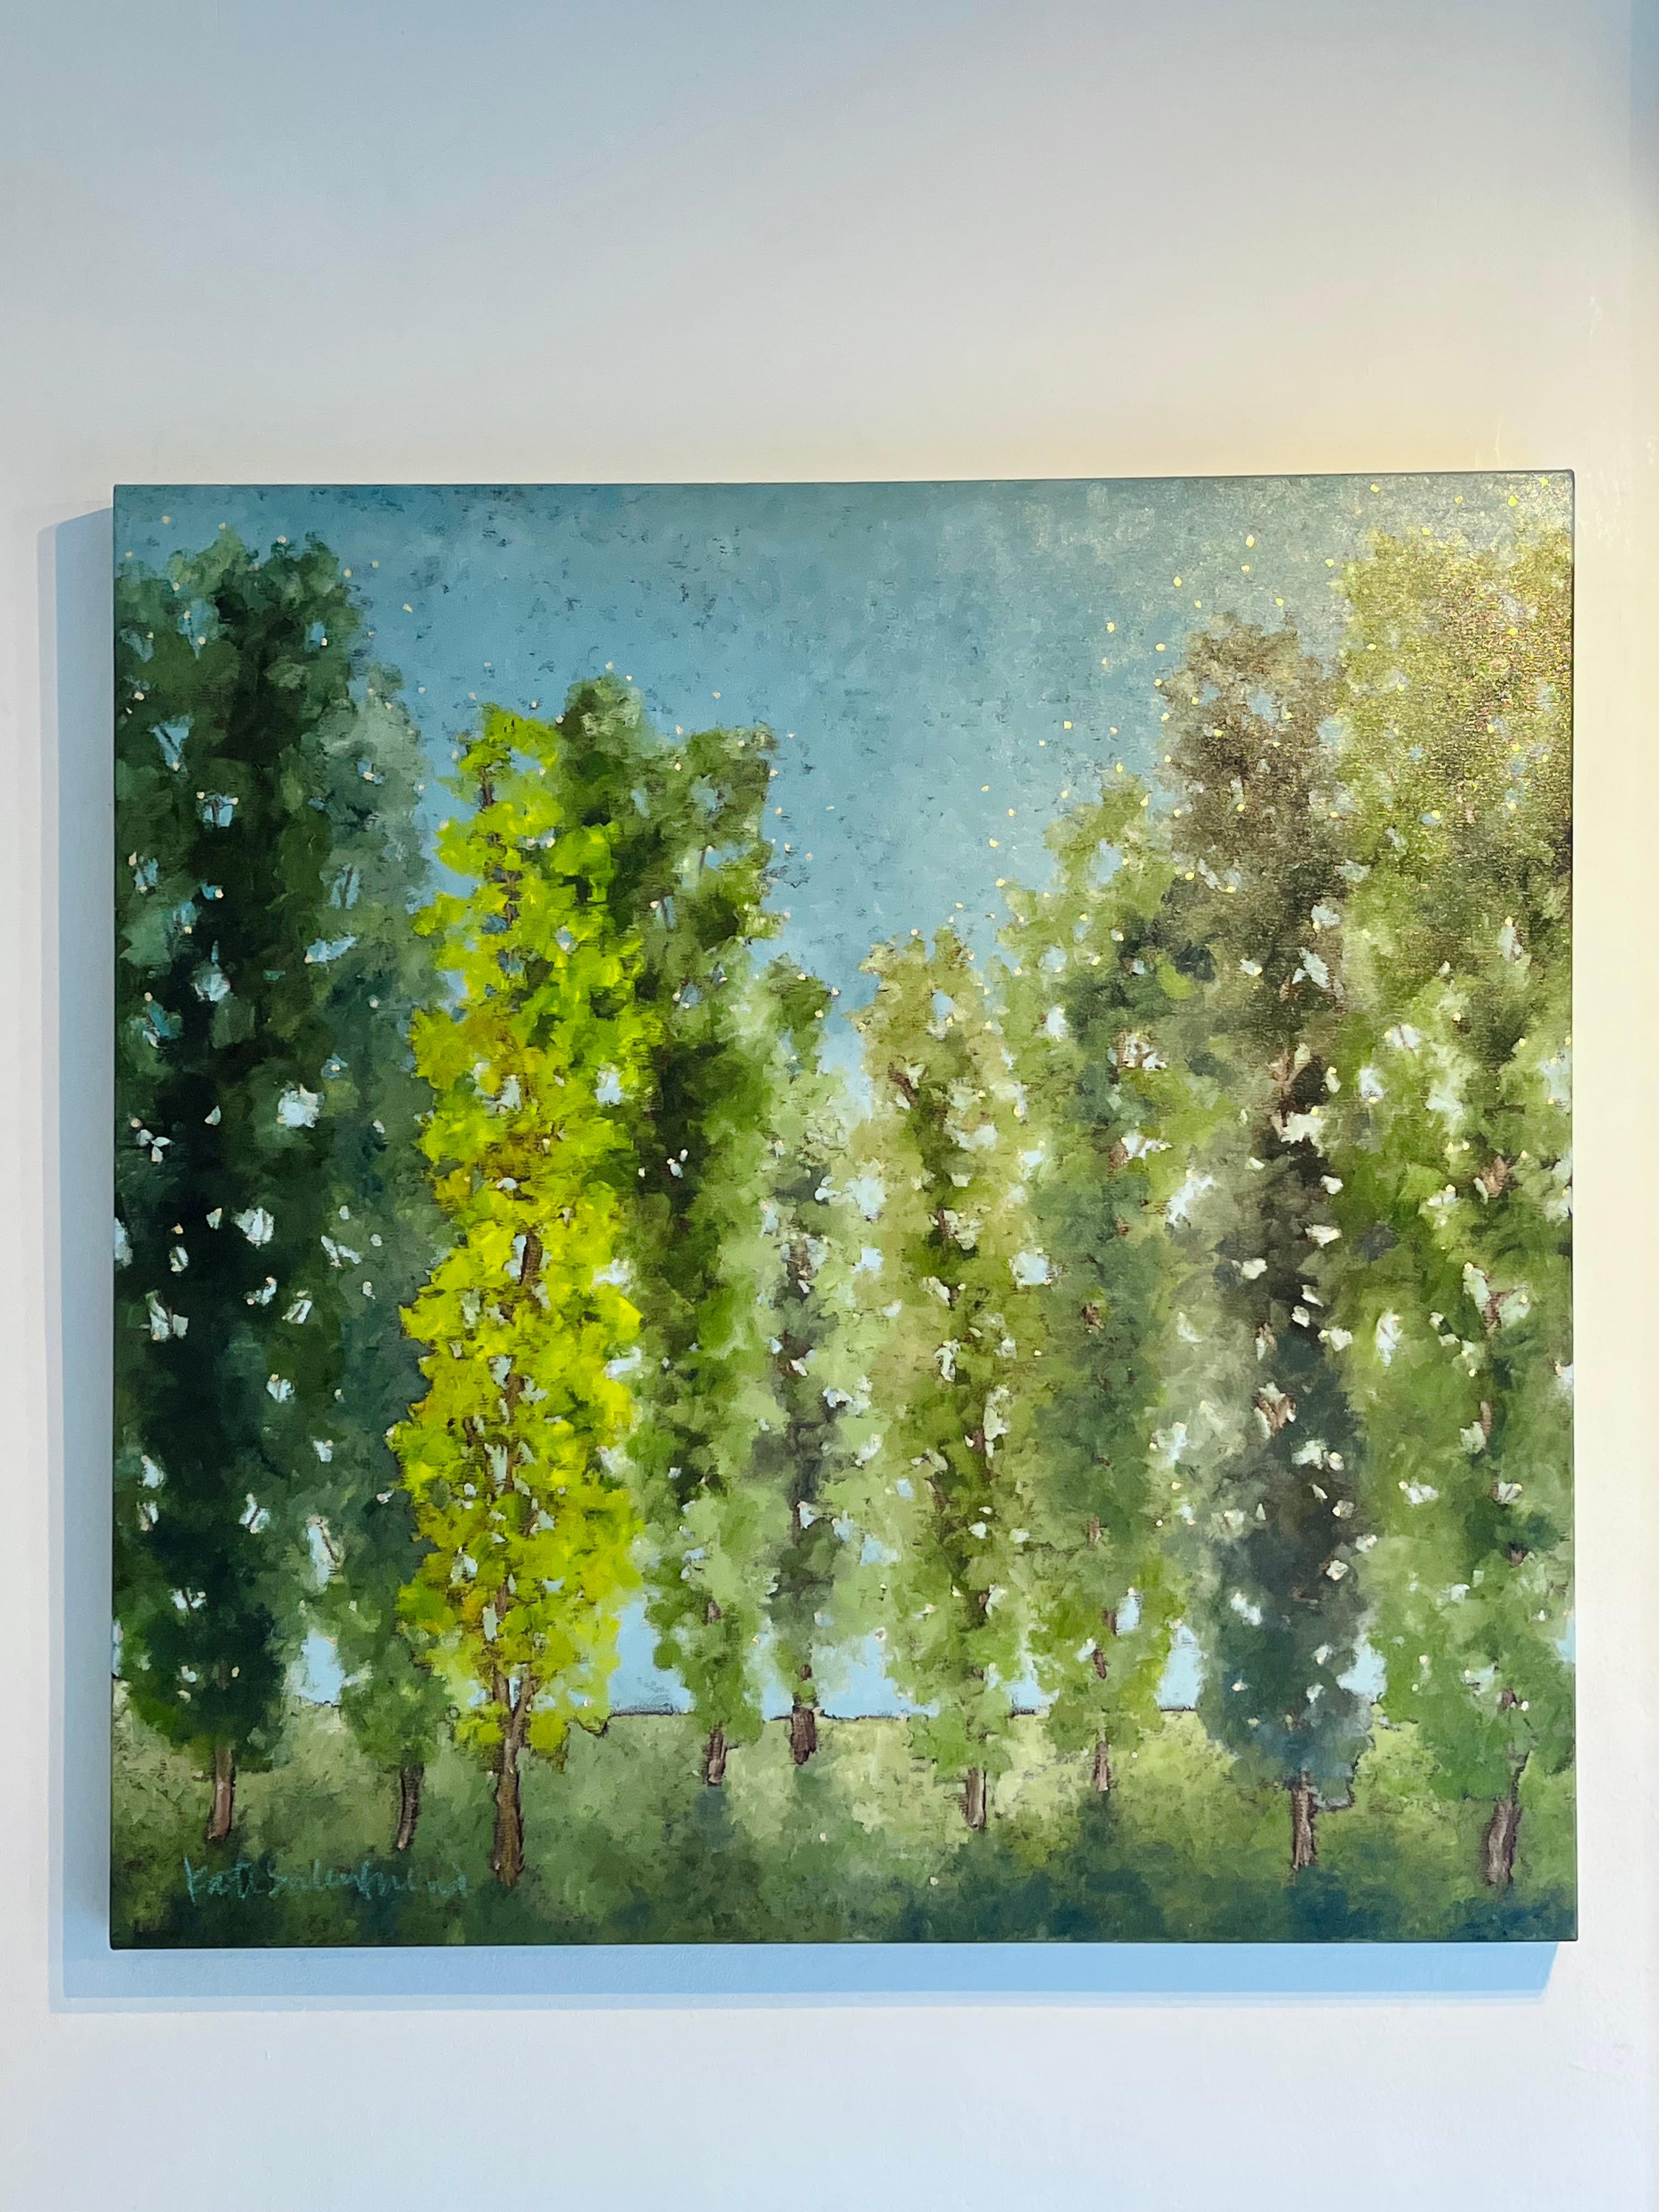 Dreams-original modern abstract trees landscape oil paintings-contemporary Art - Painting by Kate Salenfriend